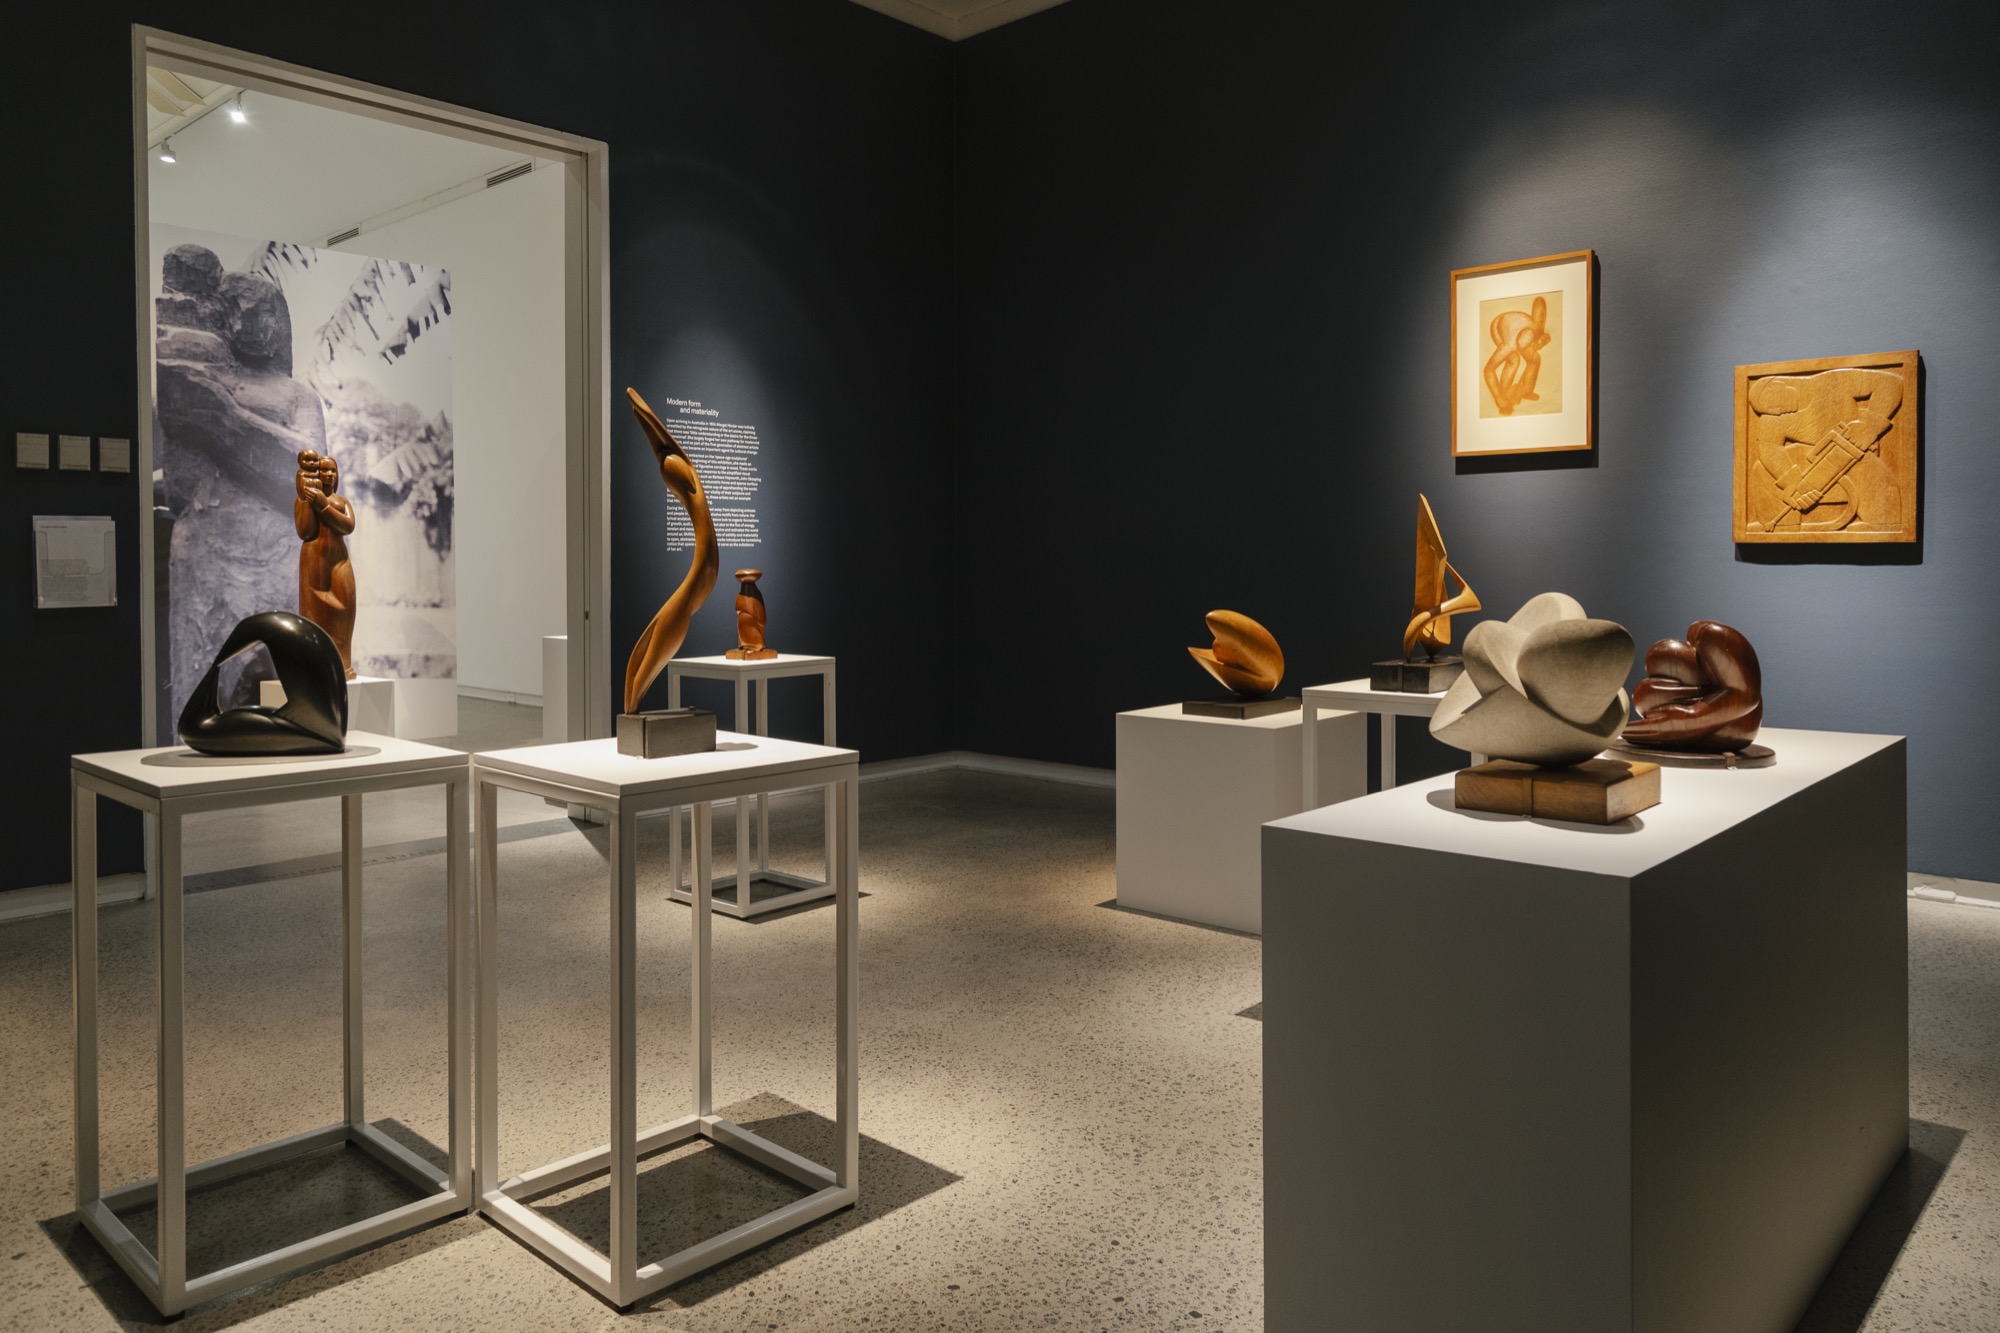 Installation view, Margel Hinder: Modern in Motion, Heide Museum of Modern Art, with carvings from the 1930s-1940s.